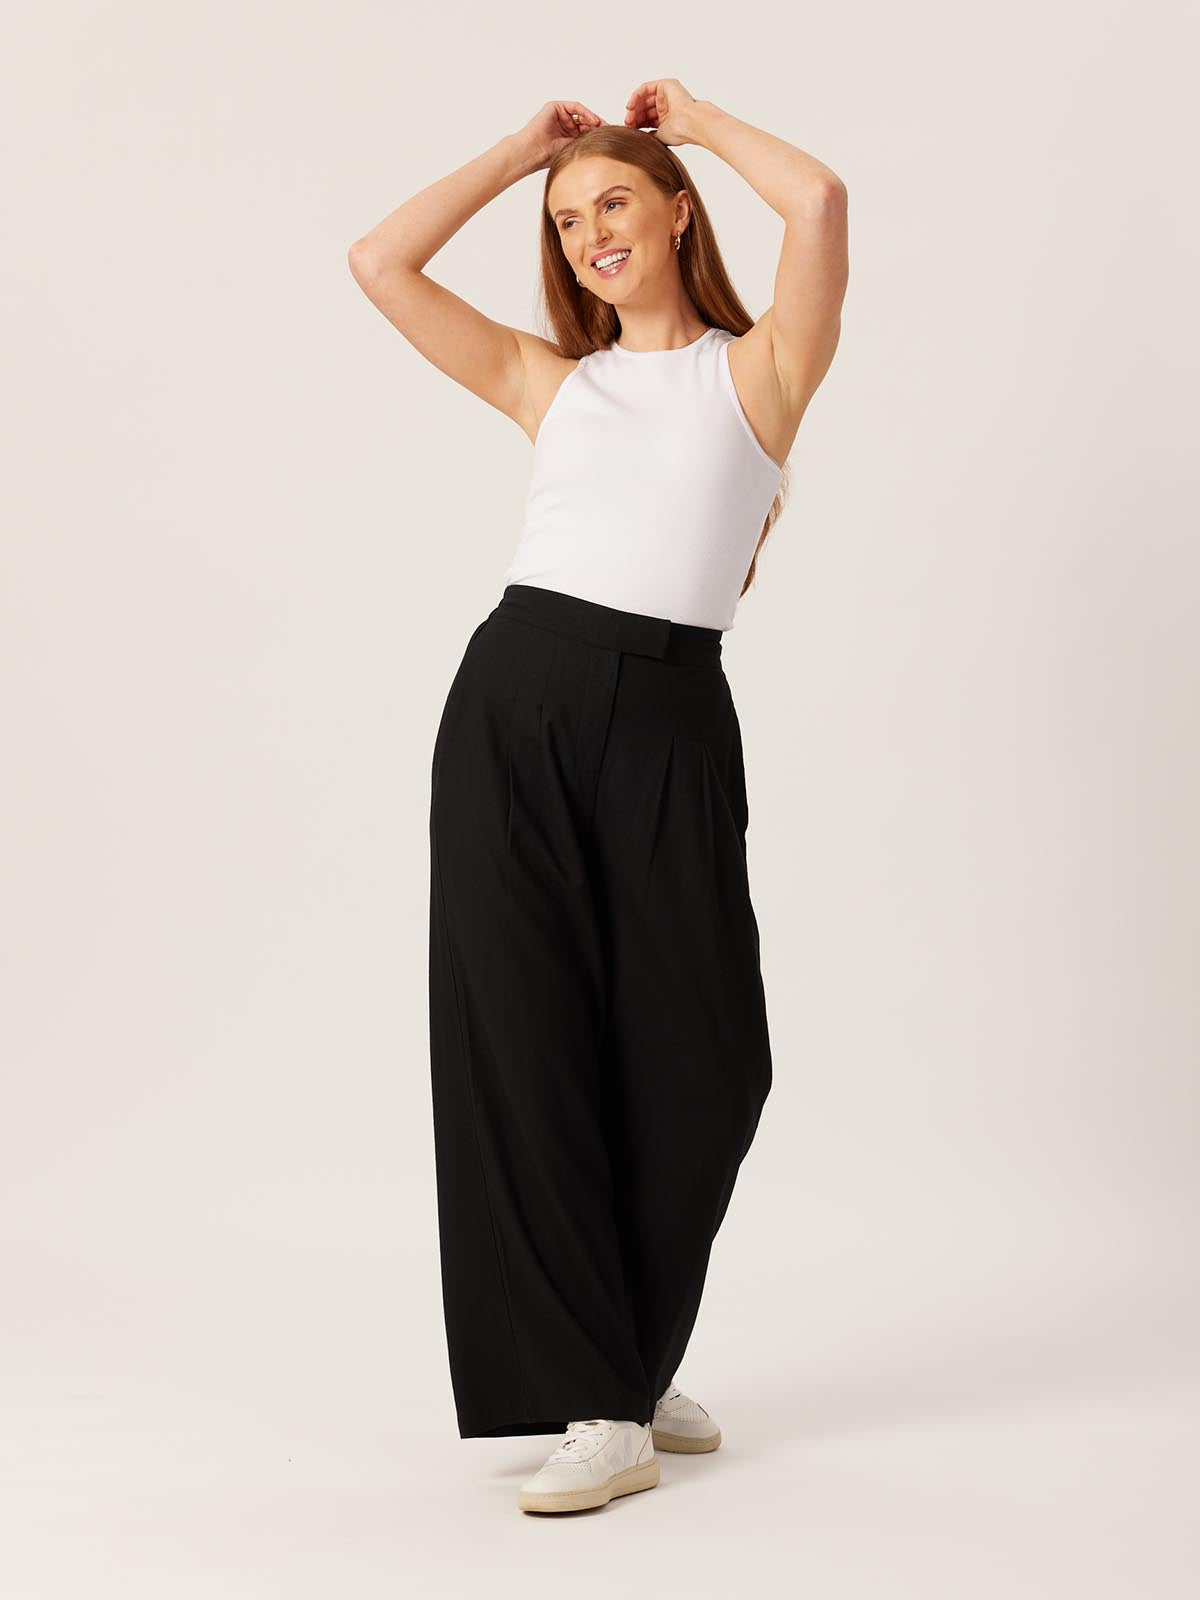 Model wearing the Lana sustainable trousers in black, pictured with their hands held above their head and smiling into the distance.